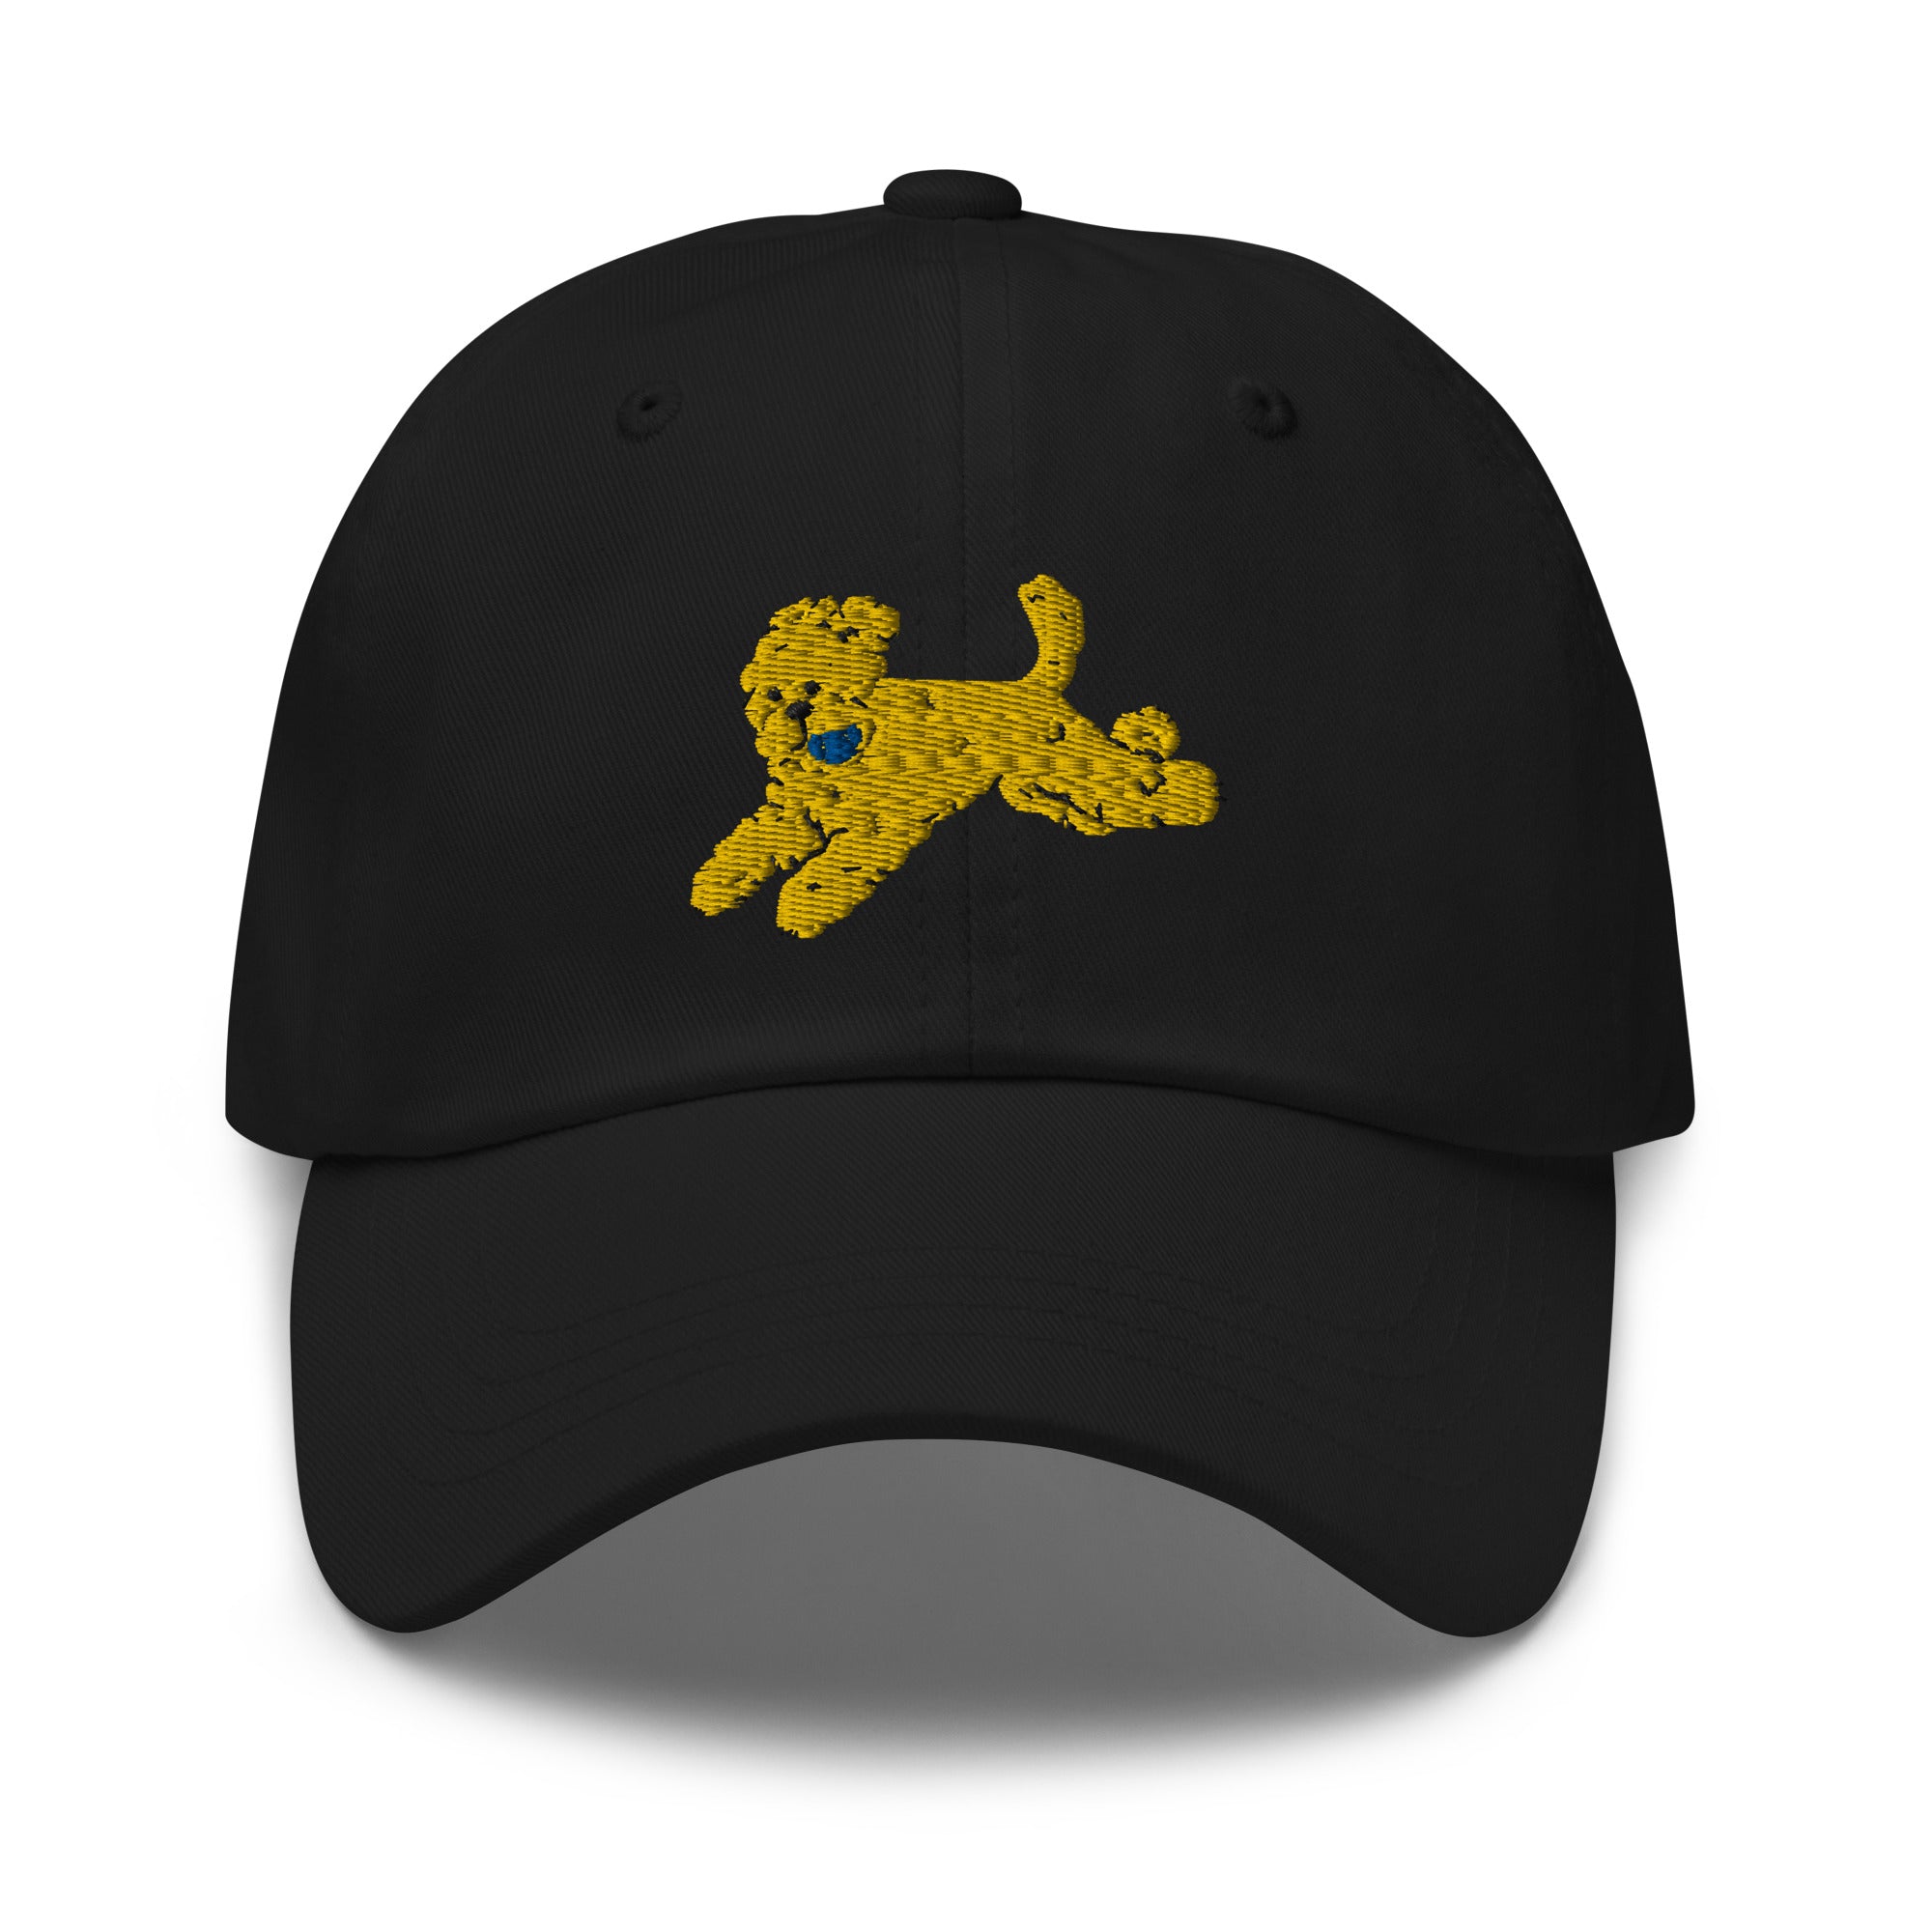 "Bear the Doodle" Dad hat